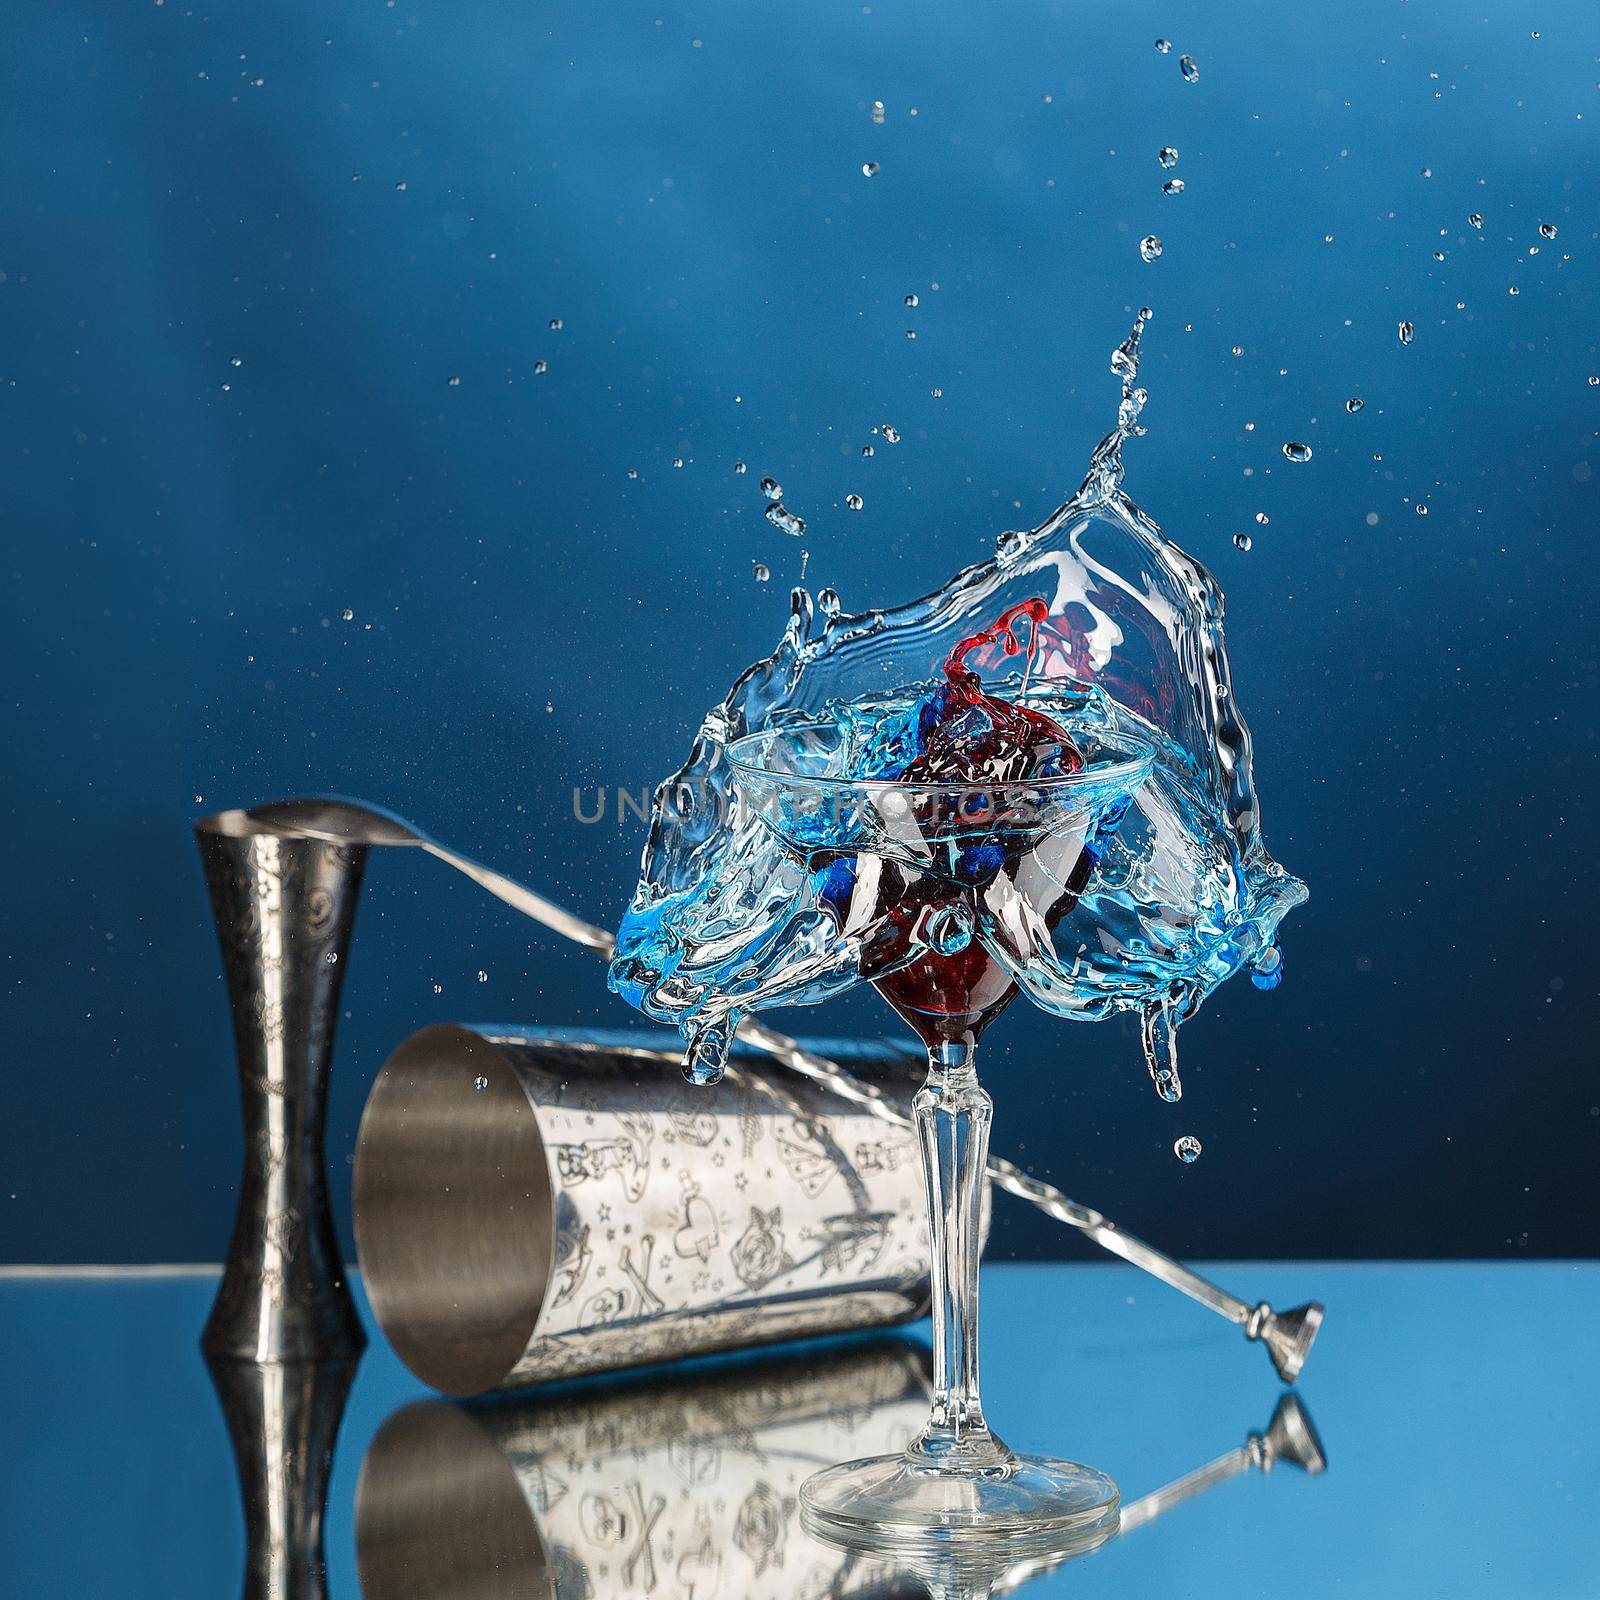 Splash from pouring martini into the glass. Cocktail, bar spoon and mixing glass on a blue background. Square image